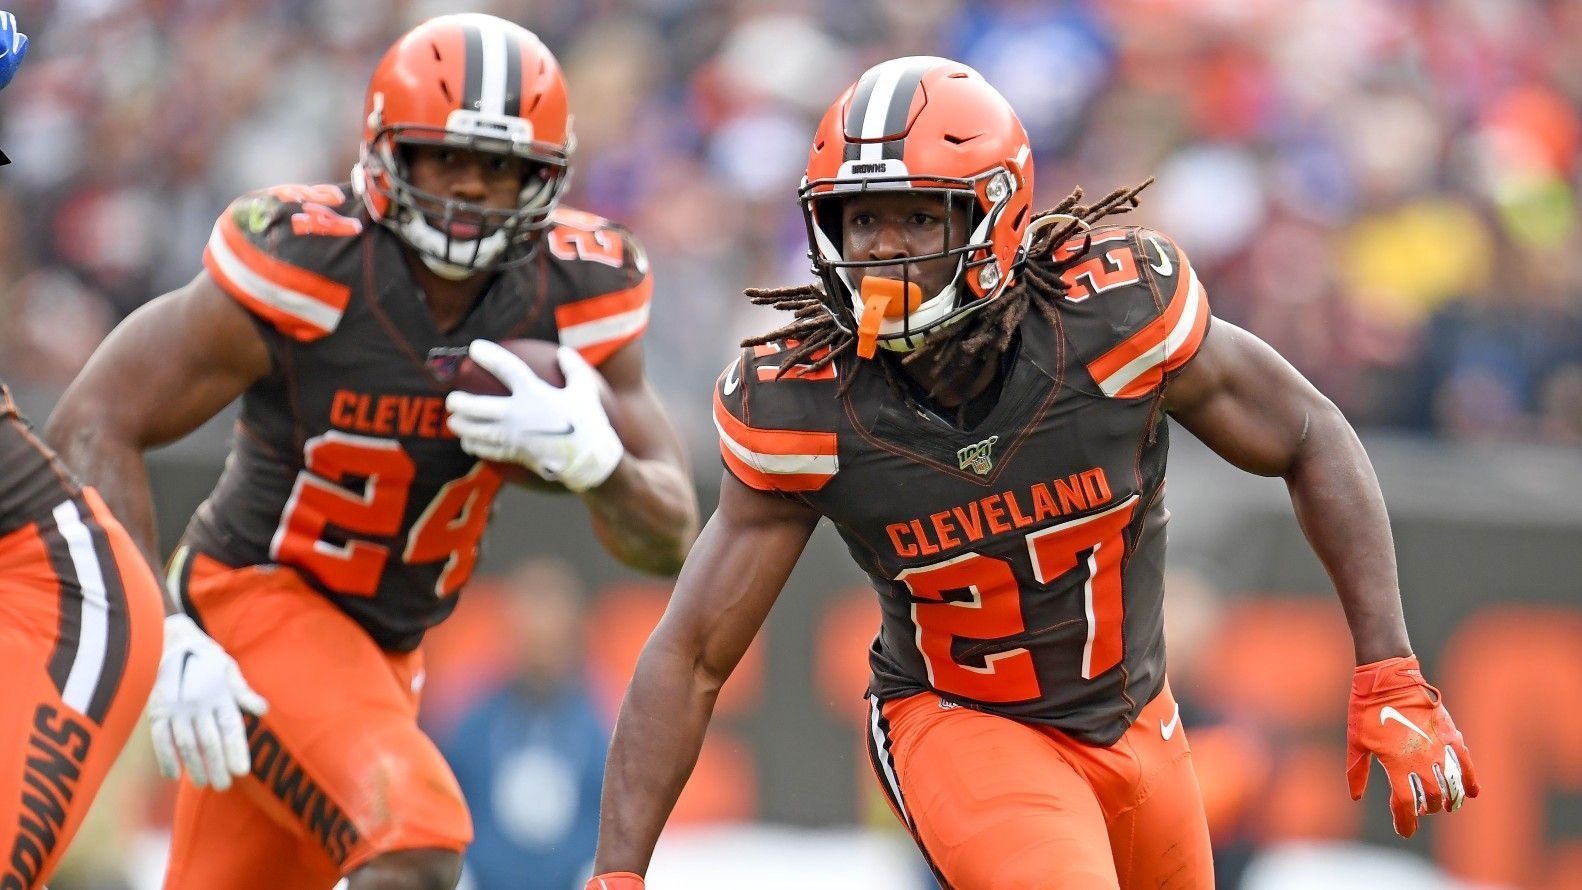 
                <strong>Rushing Offense: Cleveland Browns</strong><br>
                &#x2022; <strong>Punkte im Schnitt: 26,1</strong> - <br>&#x2022; Yards pro Spiel: 160,2 - <br>&#x2022; Touchdowns: 16 - <br>&#x2022; Fumbles: 1 - <br>
              